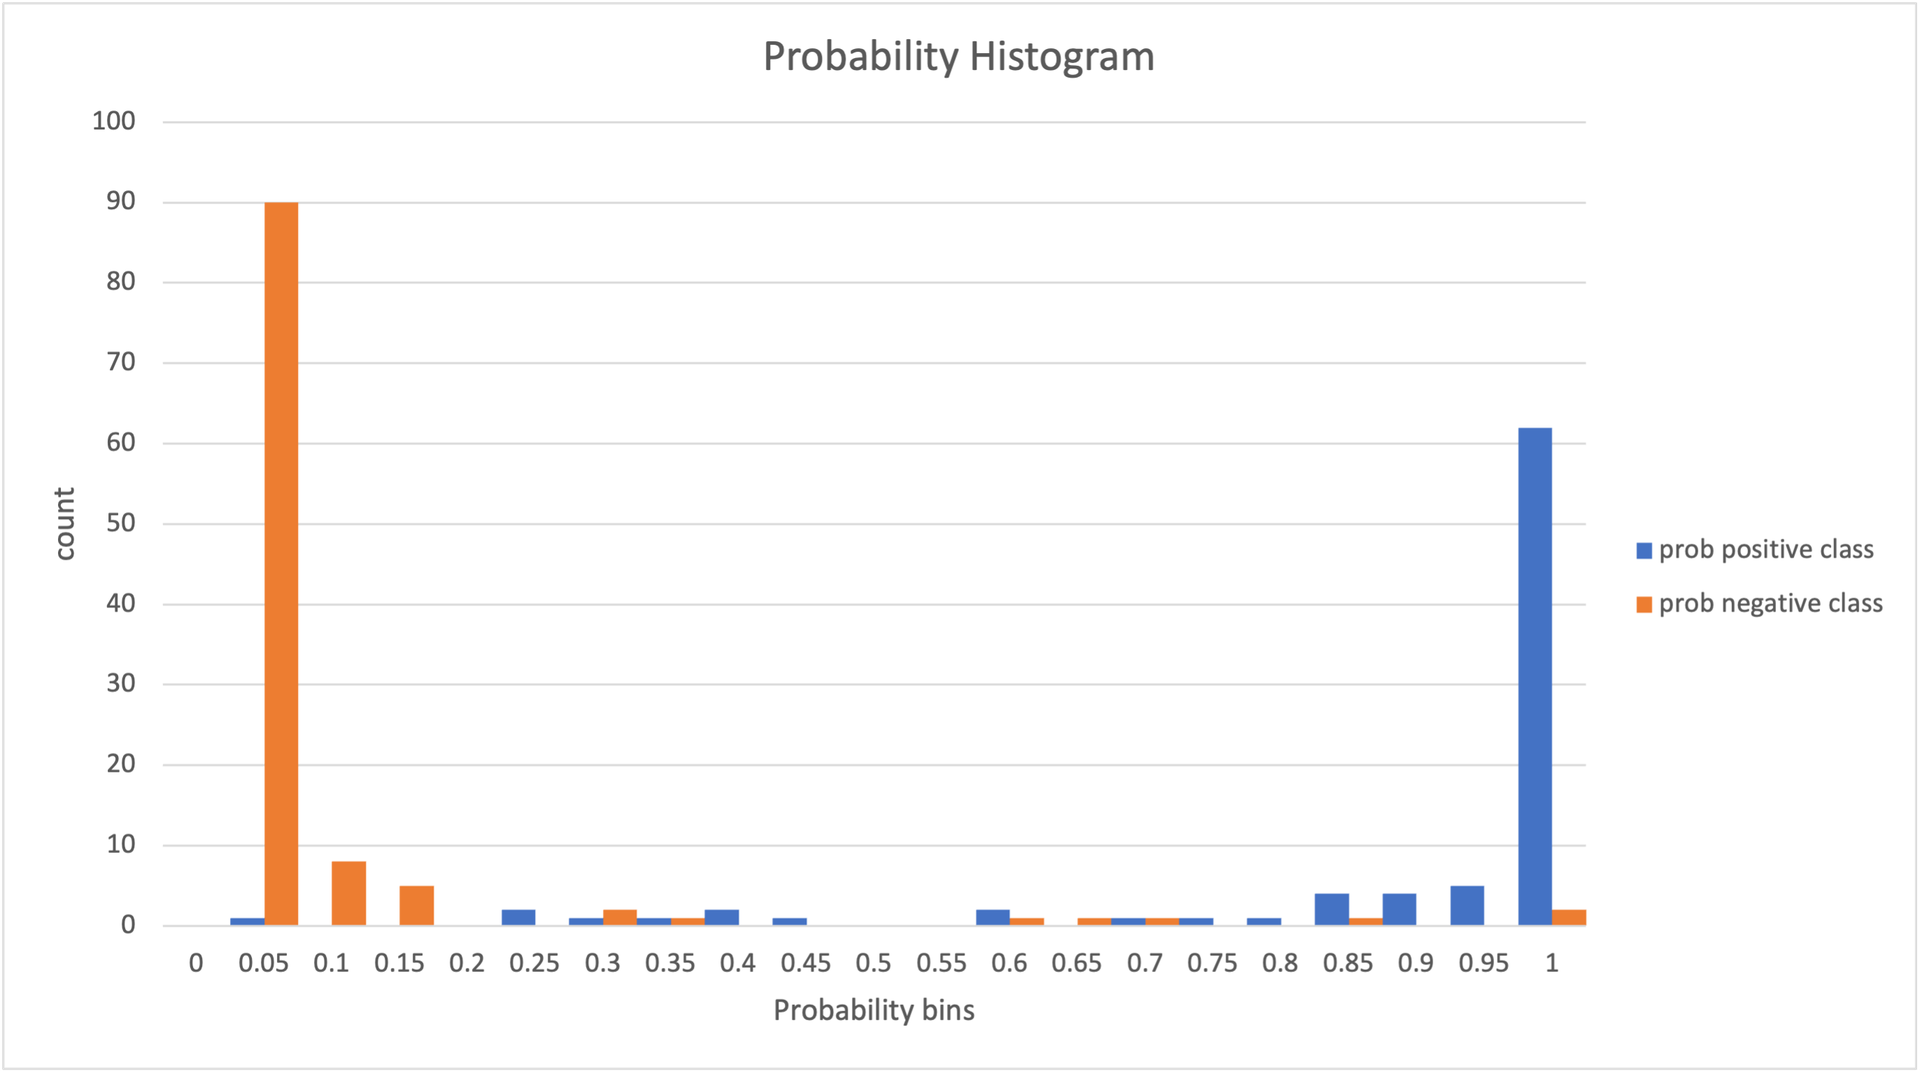 Figure 5: Prediction probability distribution histograms for positive (M) and negative (B) classes.